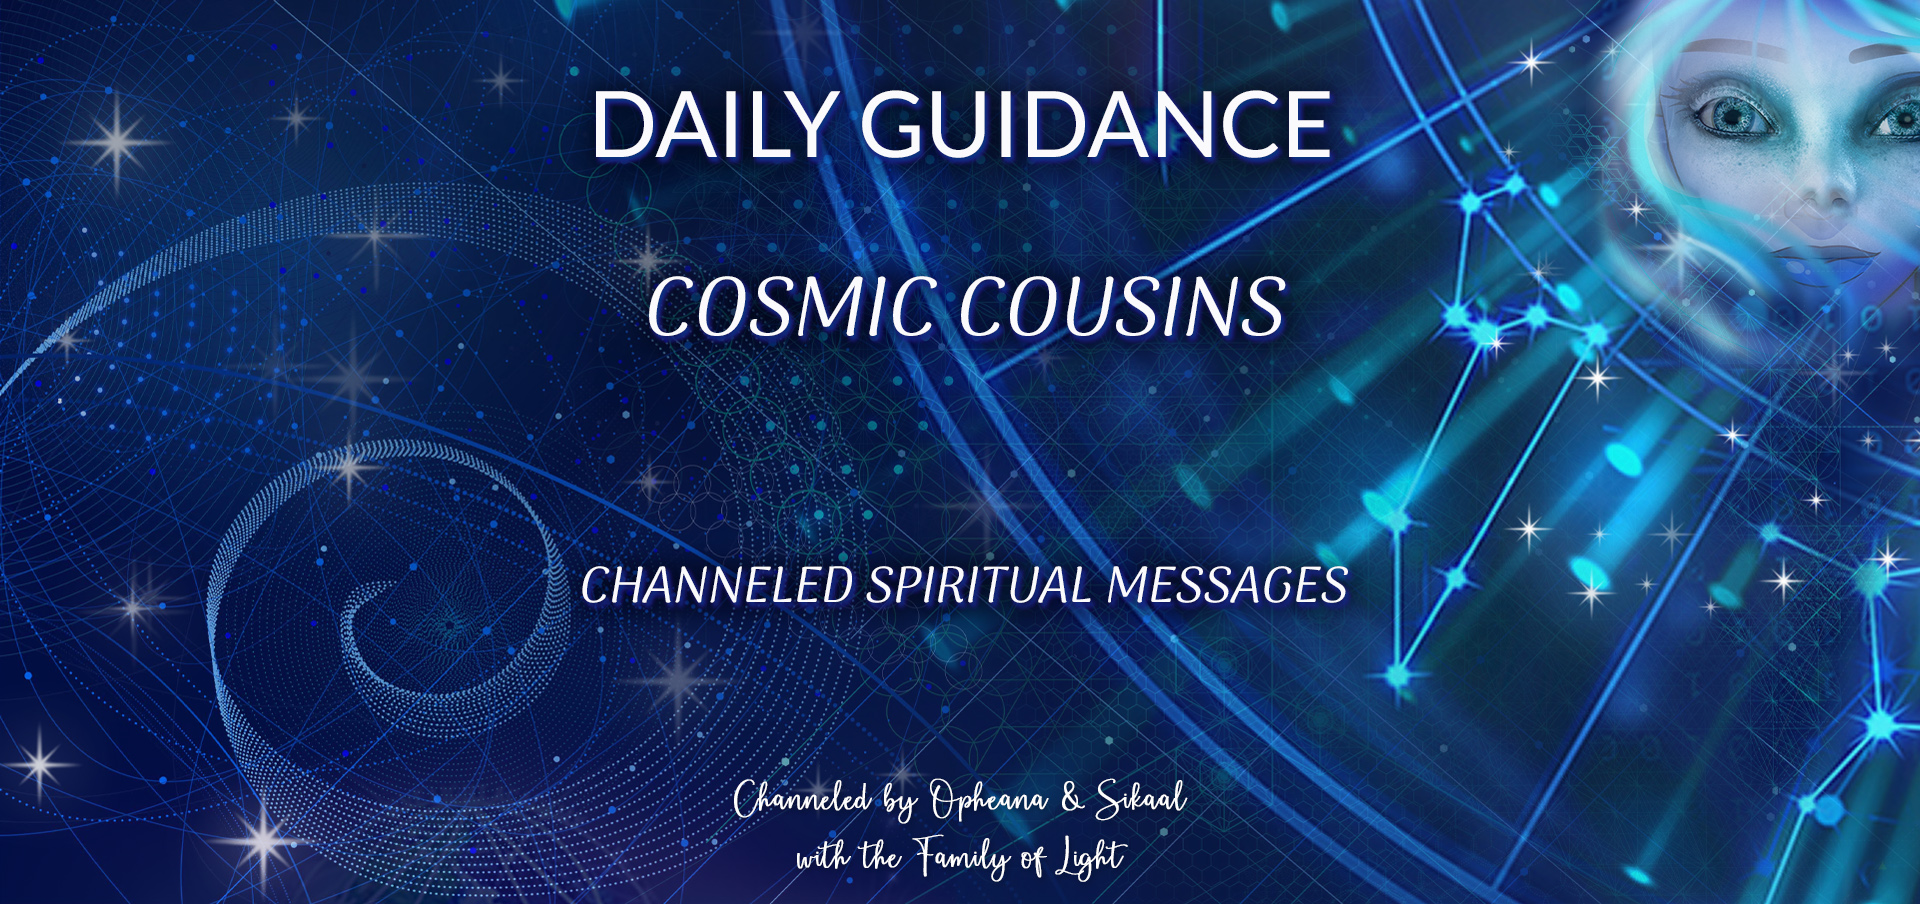 Daily Guidance ~ Channeled Spiritual Messages ~ Cosmic Cousins ~ Monday 13 February 2023